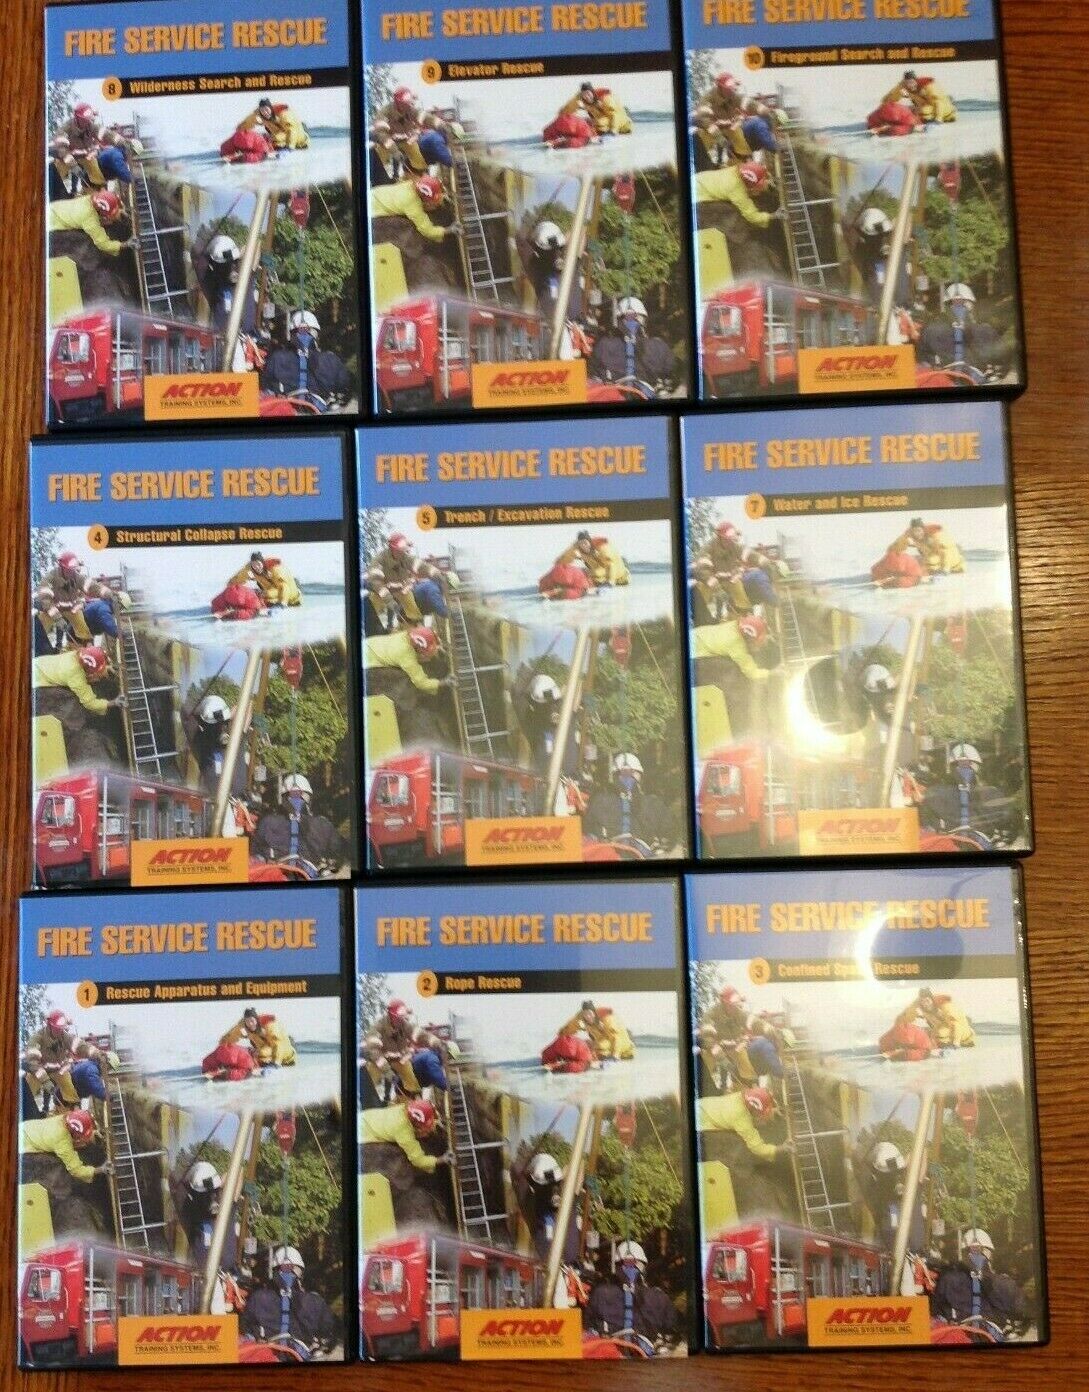 Fire Service Rescue 9 Dvds, Action Training Systems